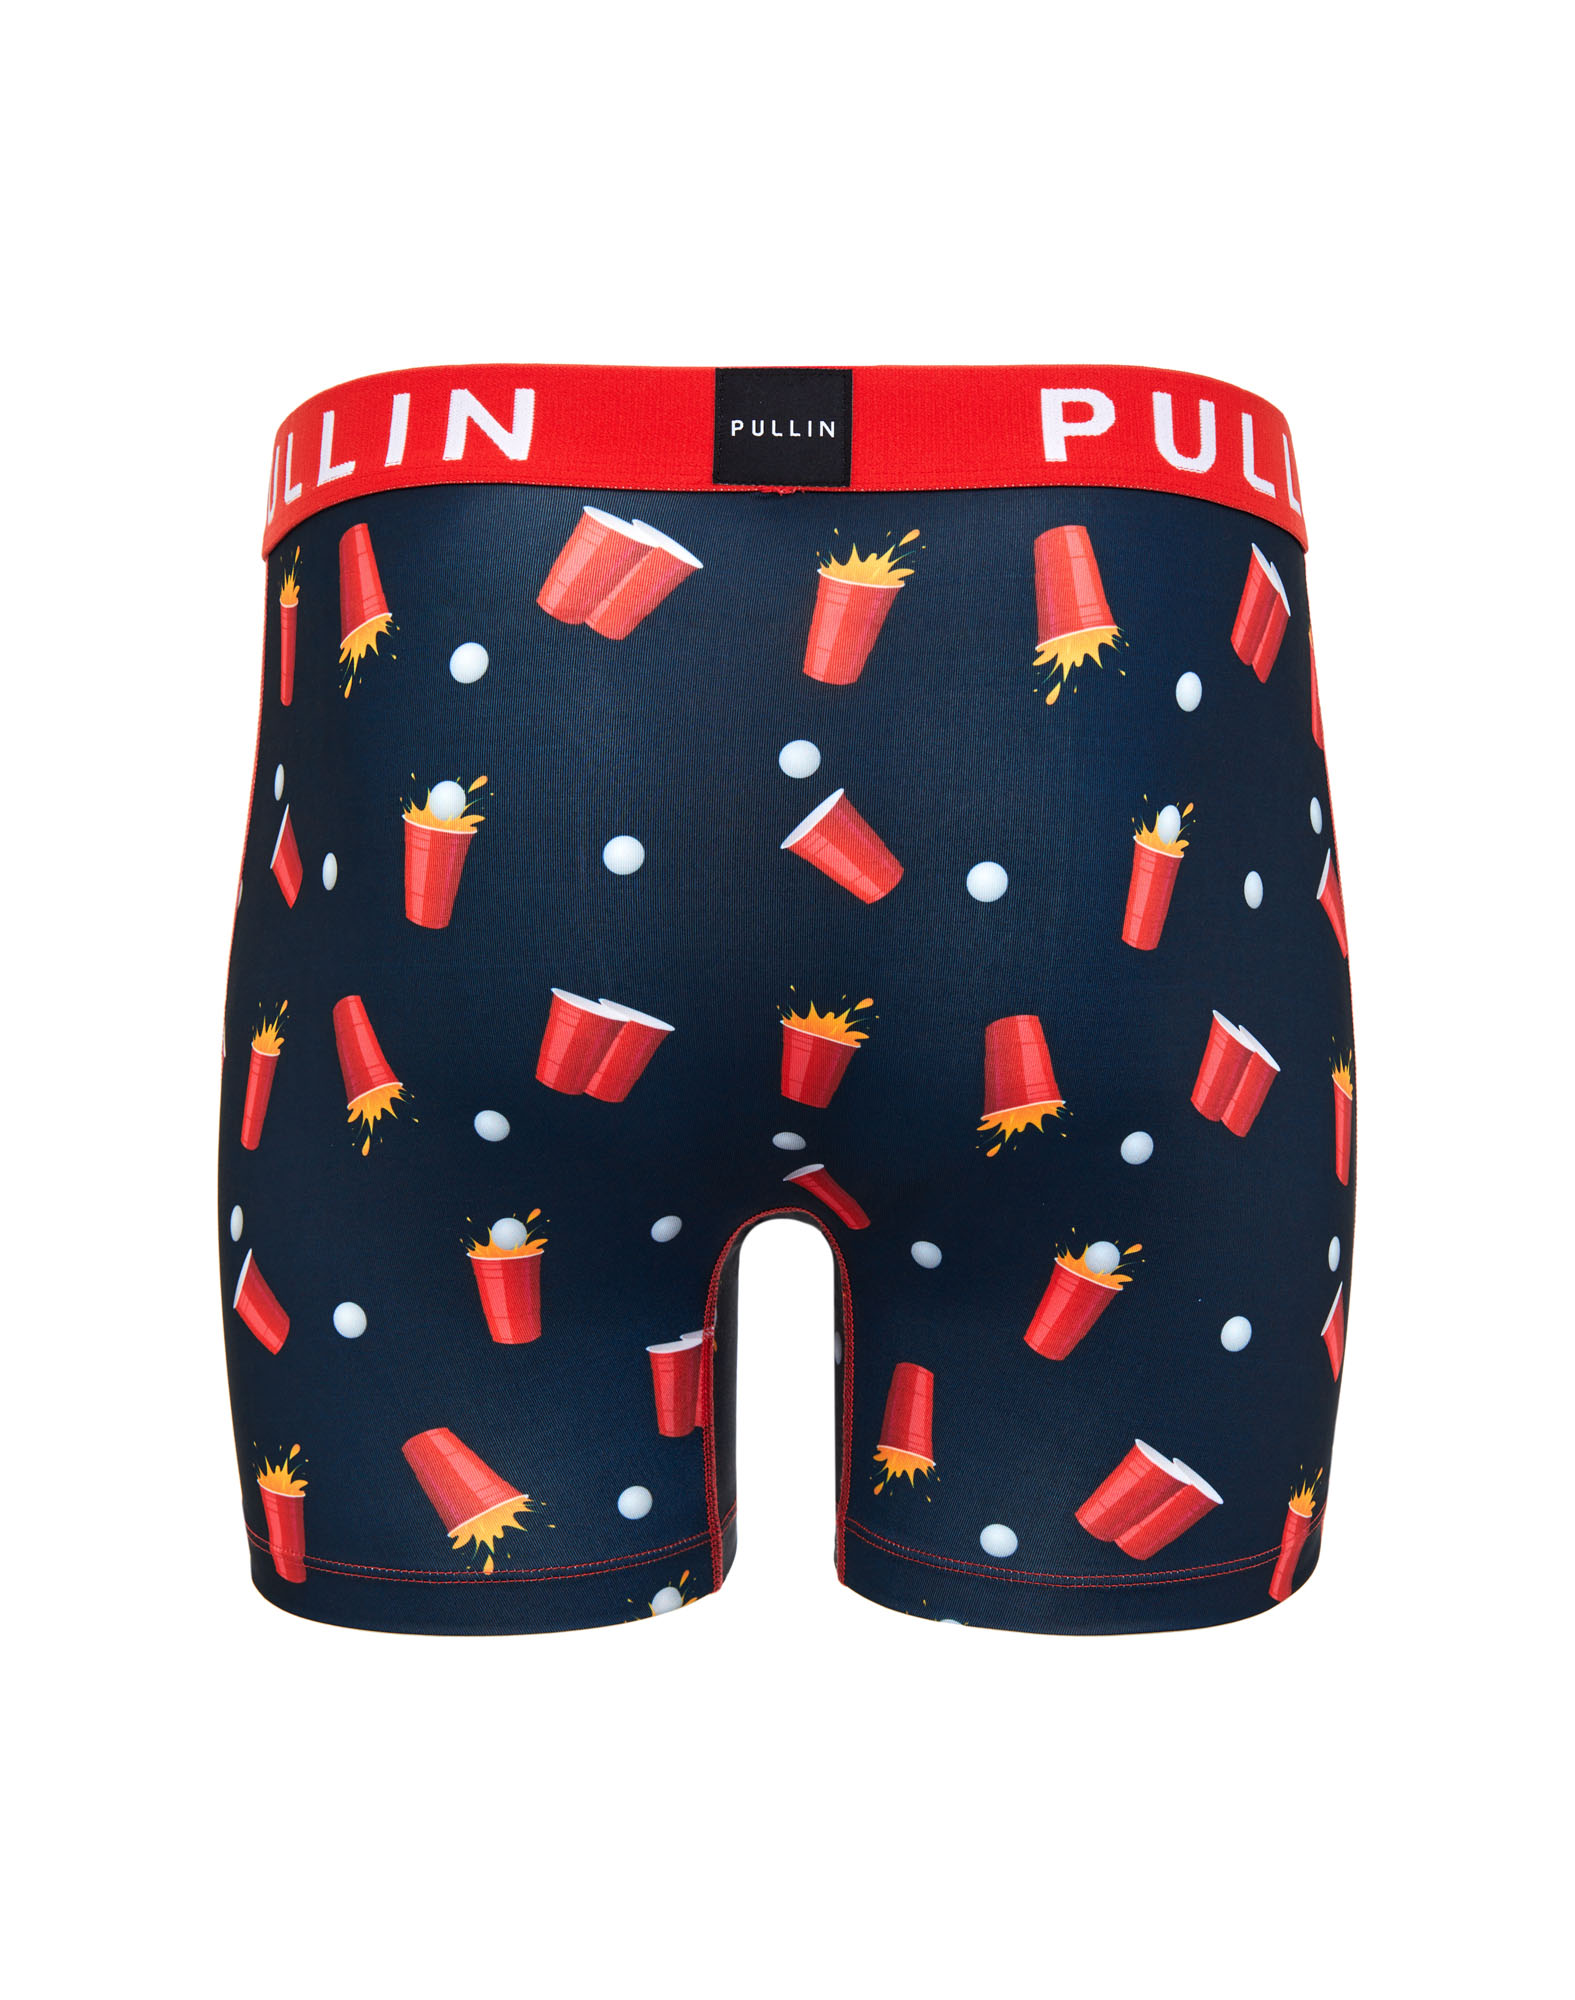 Men's trunk FASHION 2 BEERPONG